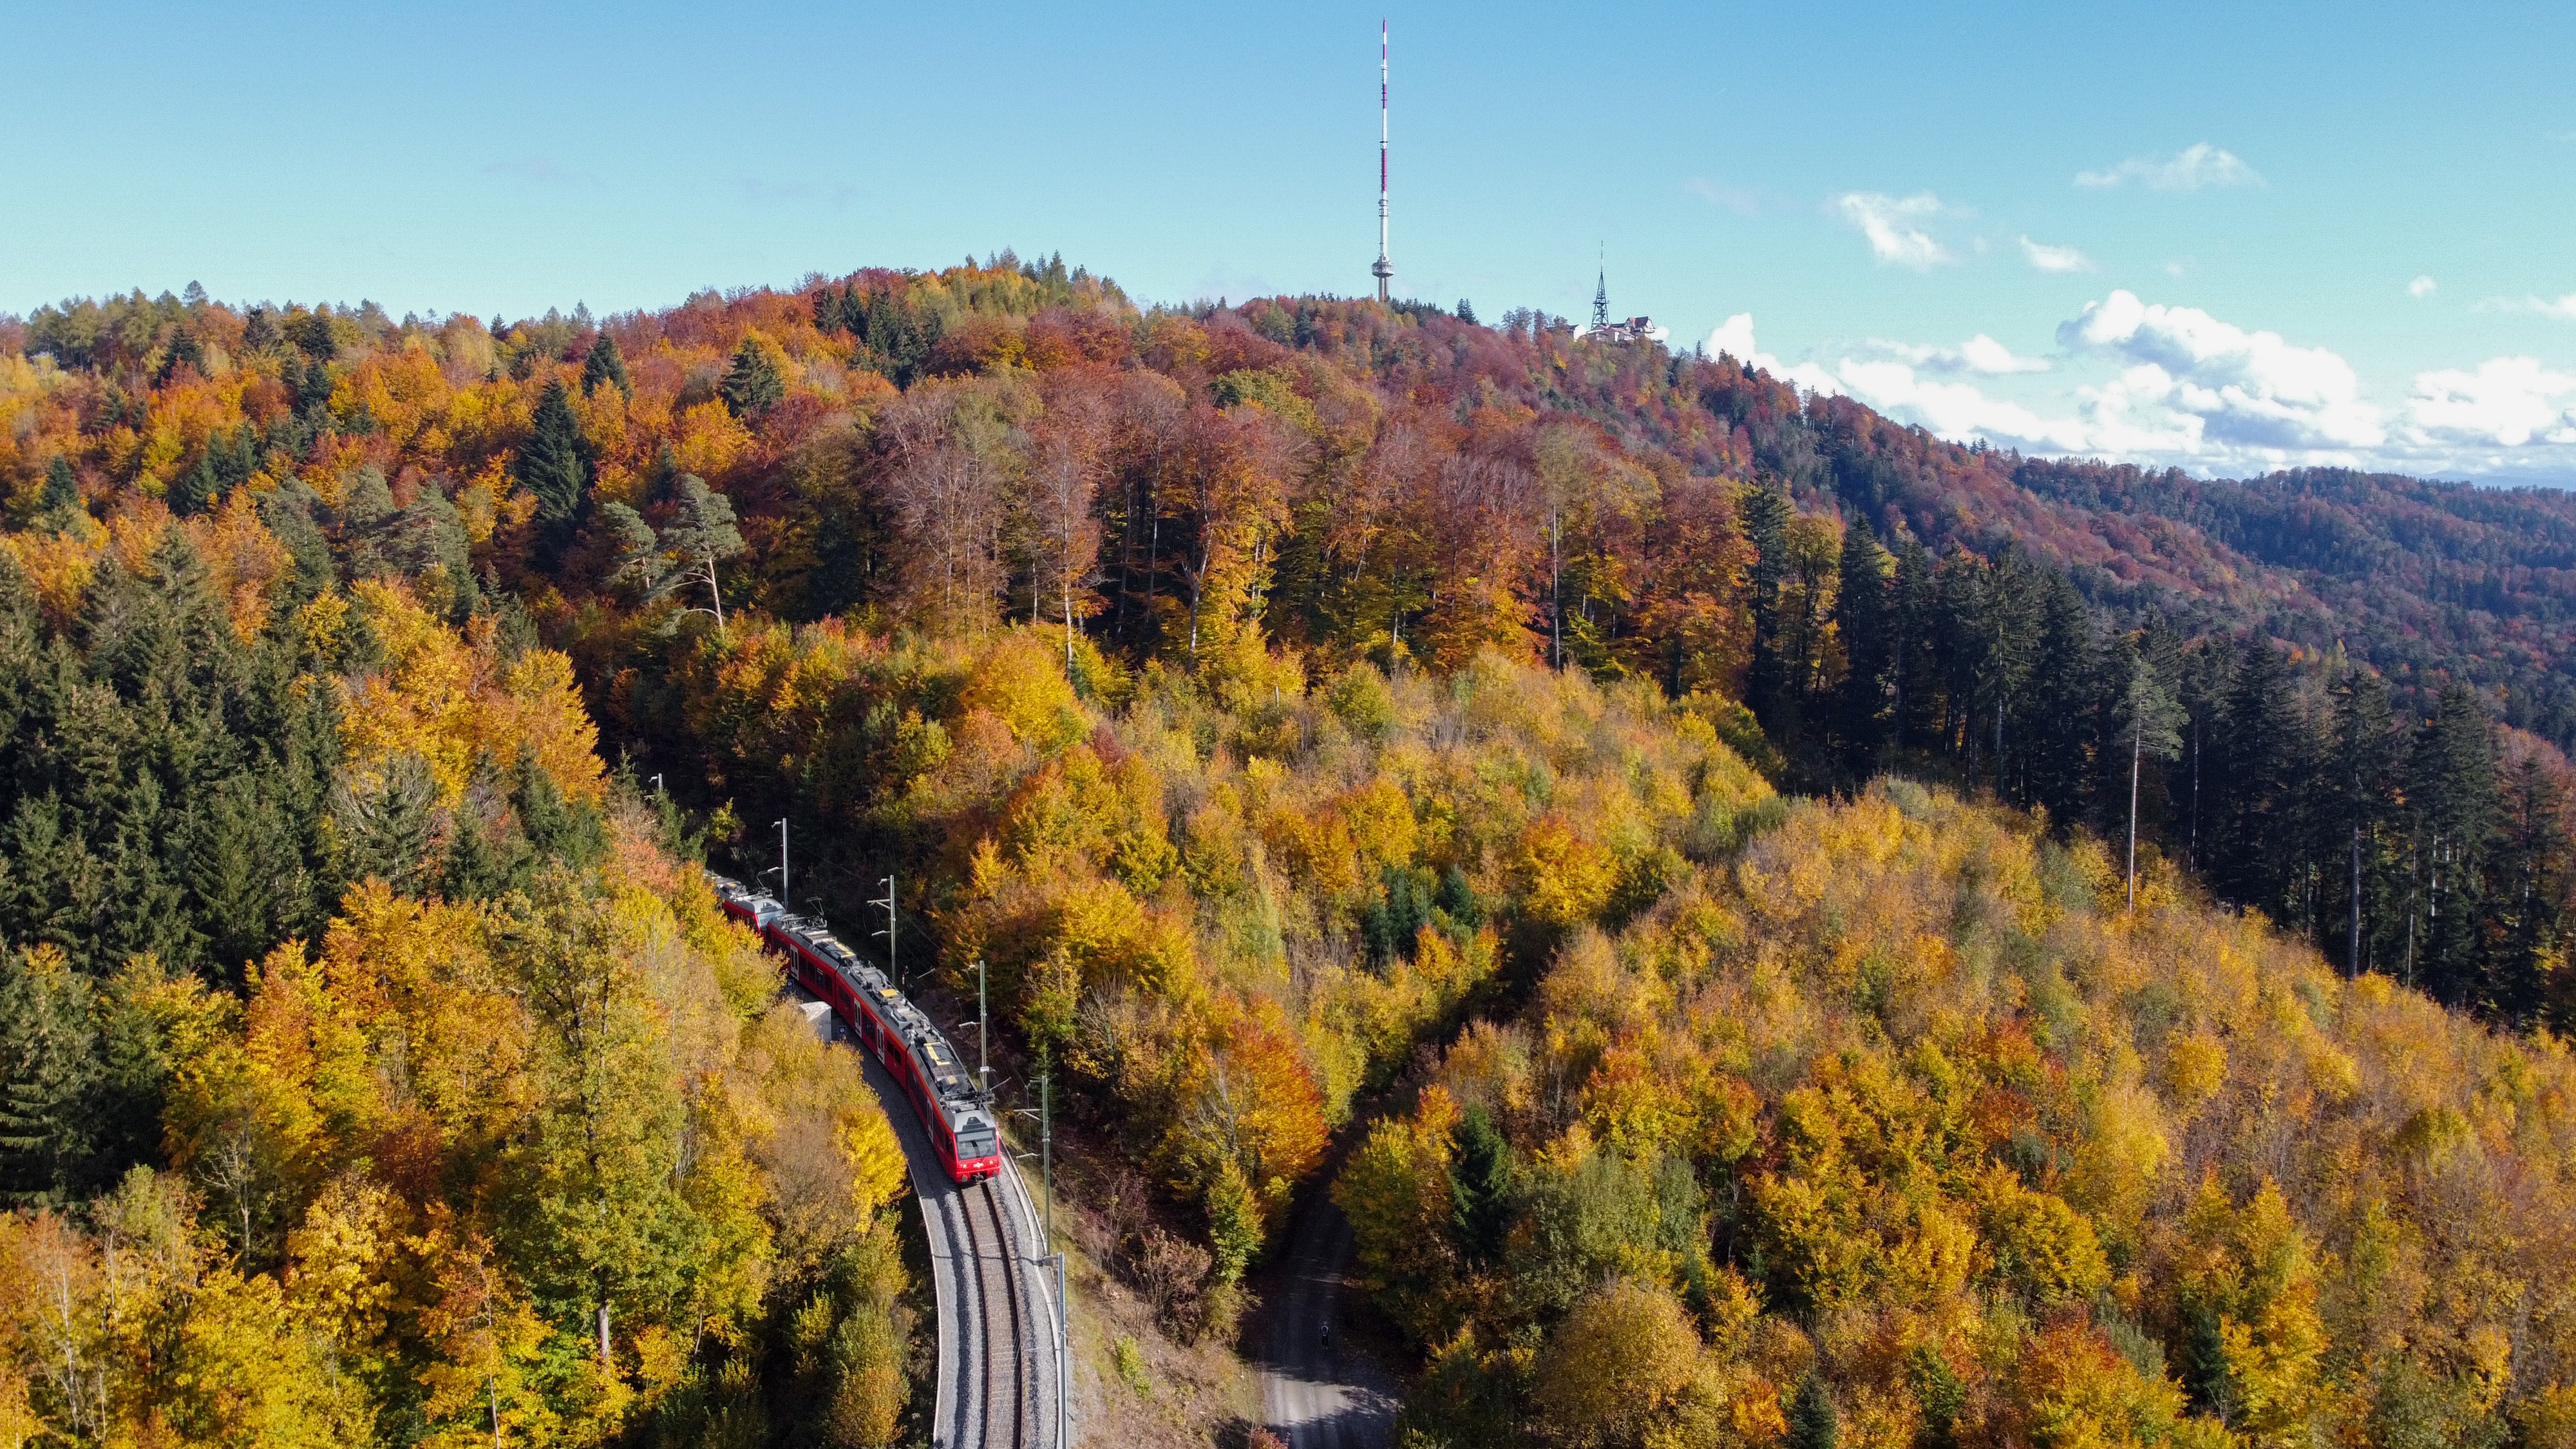 Autumn view with a train